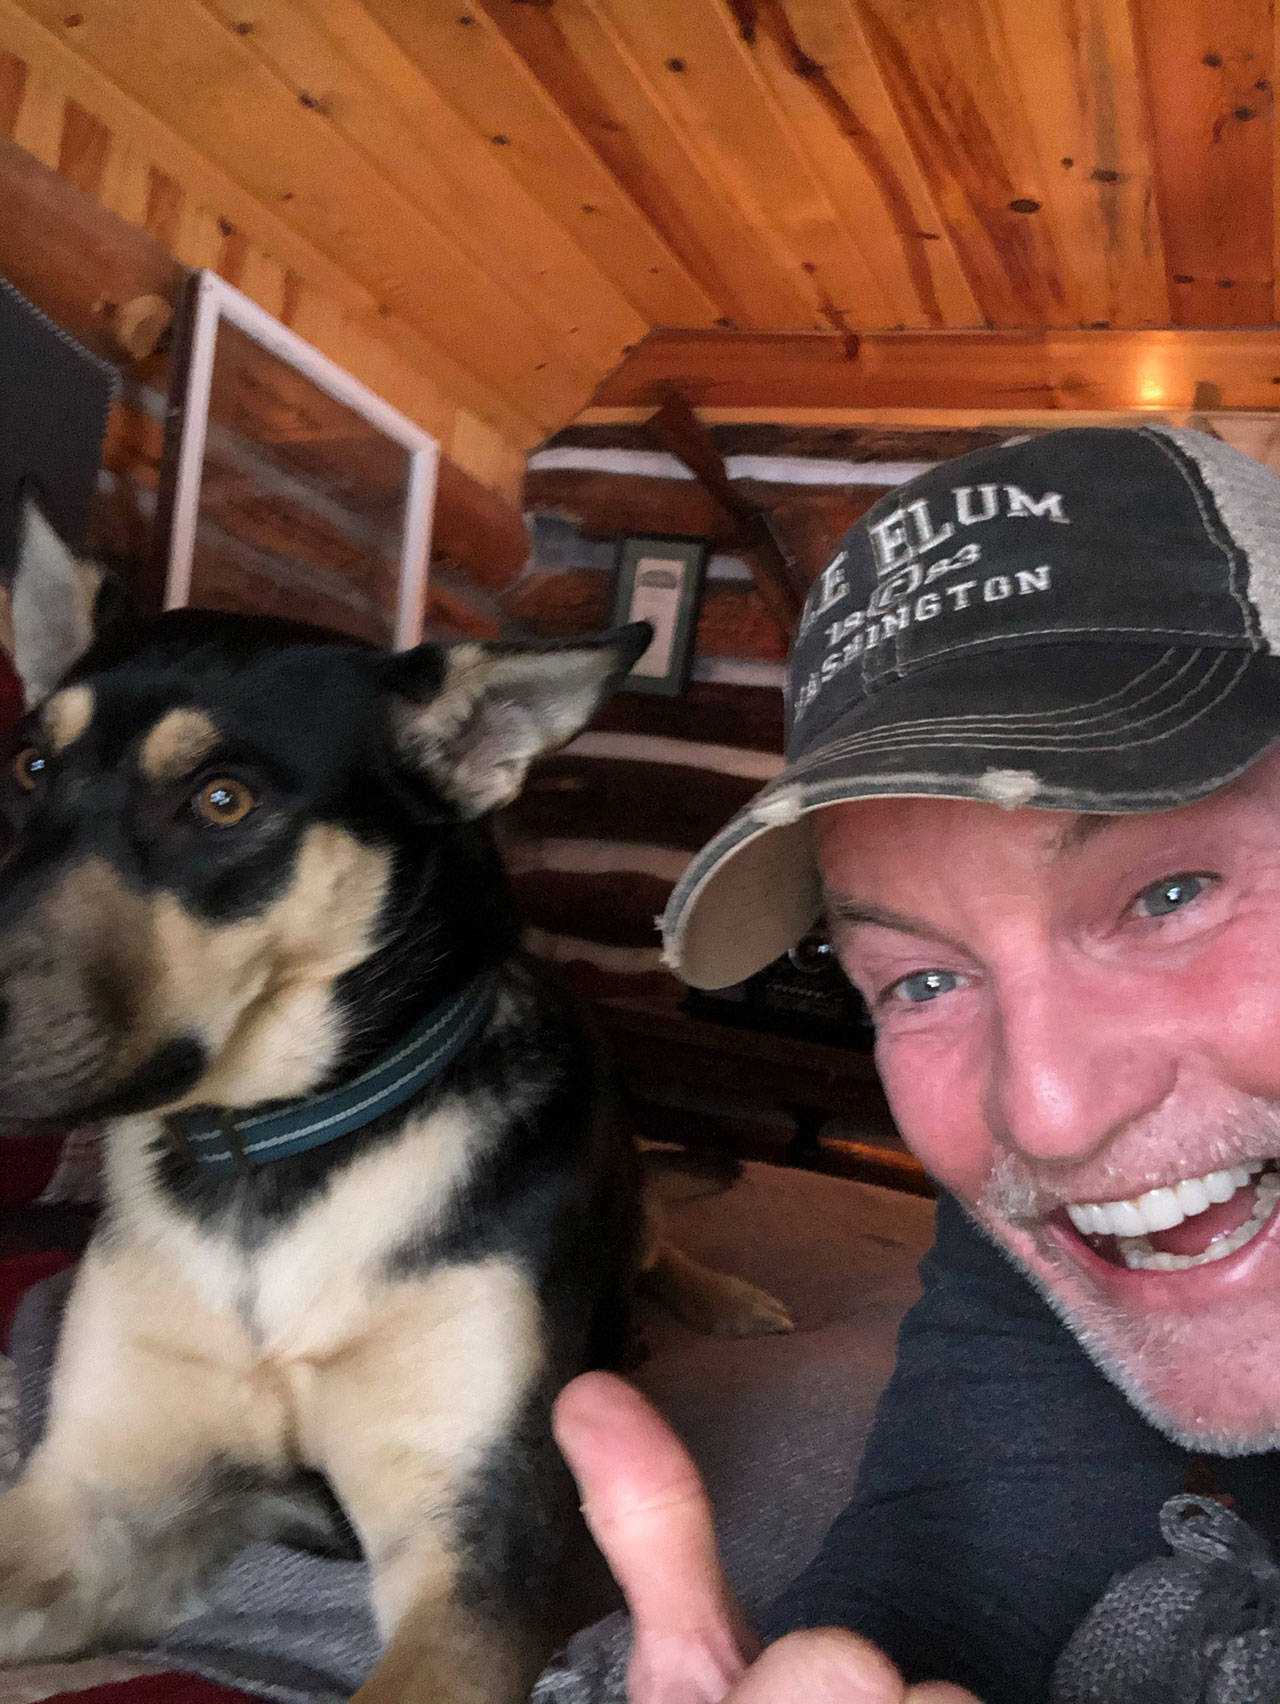 KIRO radio host John Curley of “The Tom and Curley Show” with Luu, a shepherd mix he adopted from PAWS in Lynnwood. (John Curley)